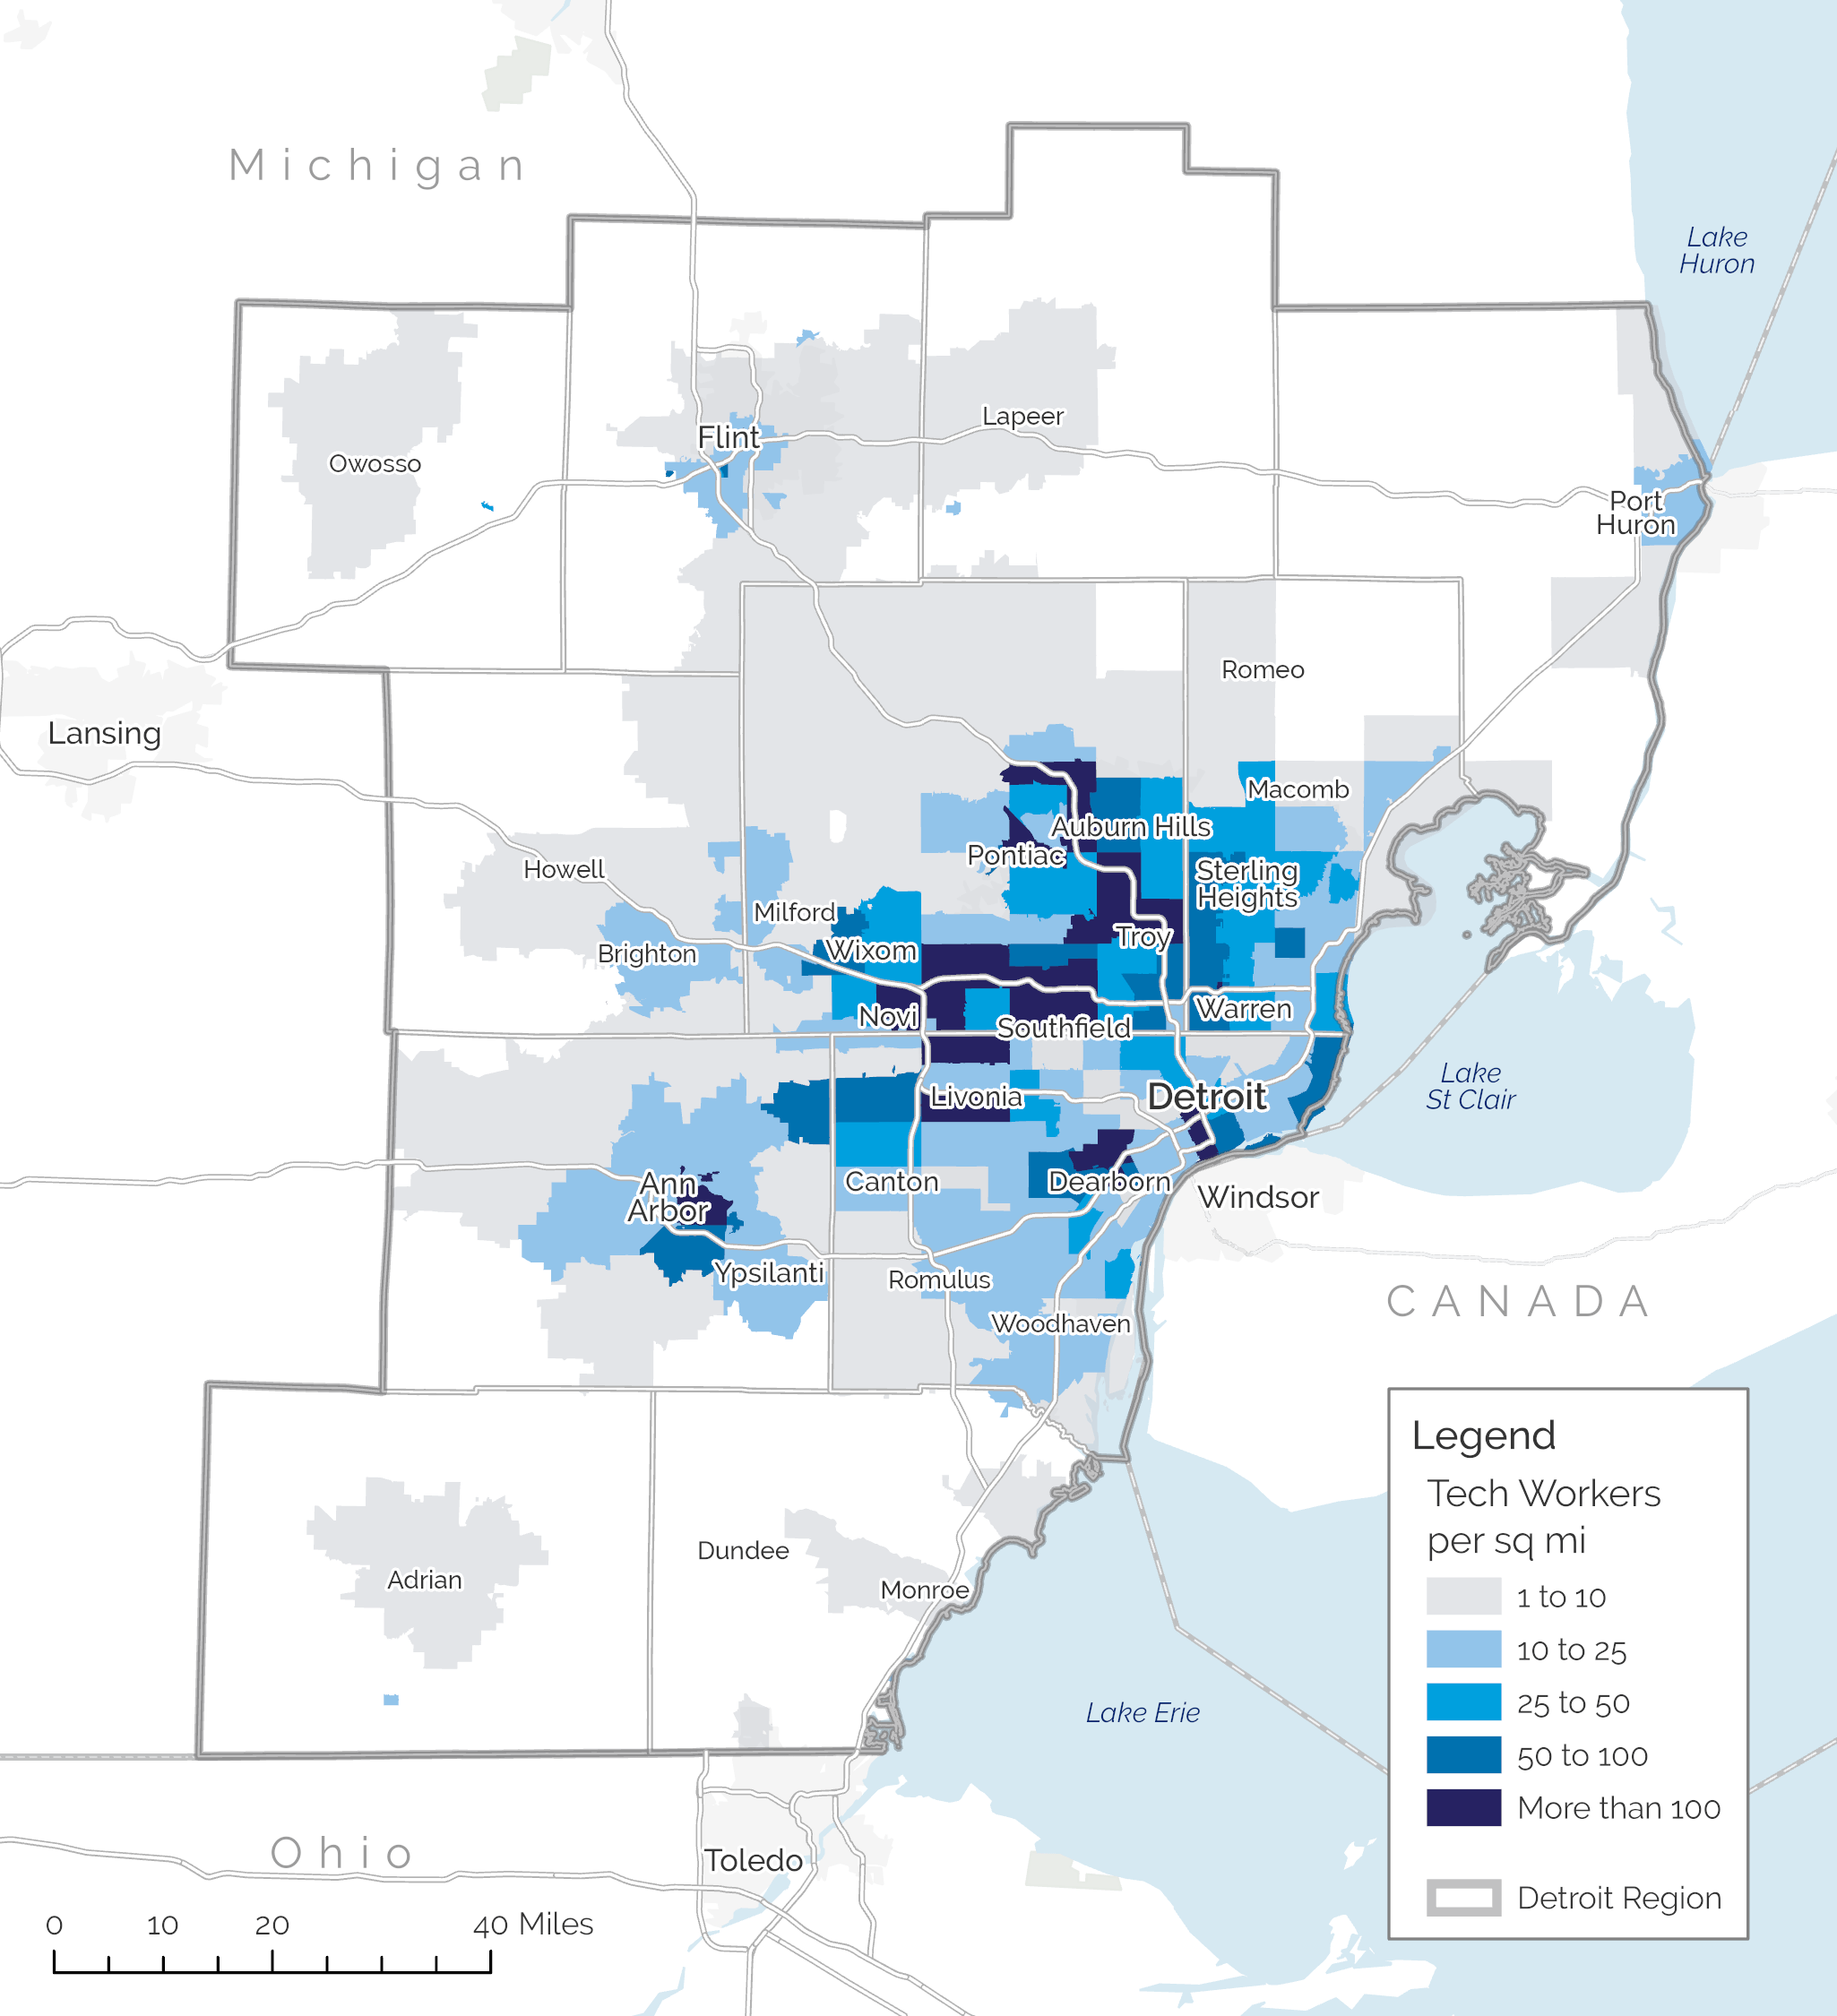 Map representing the density of tech workers in the Detroit Region